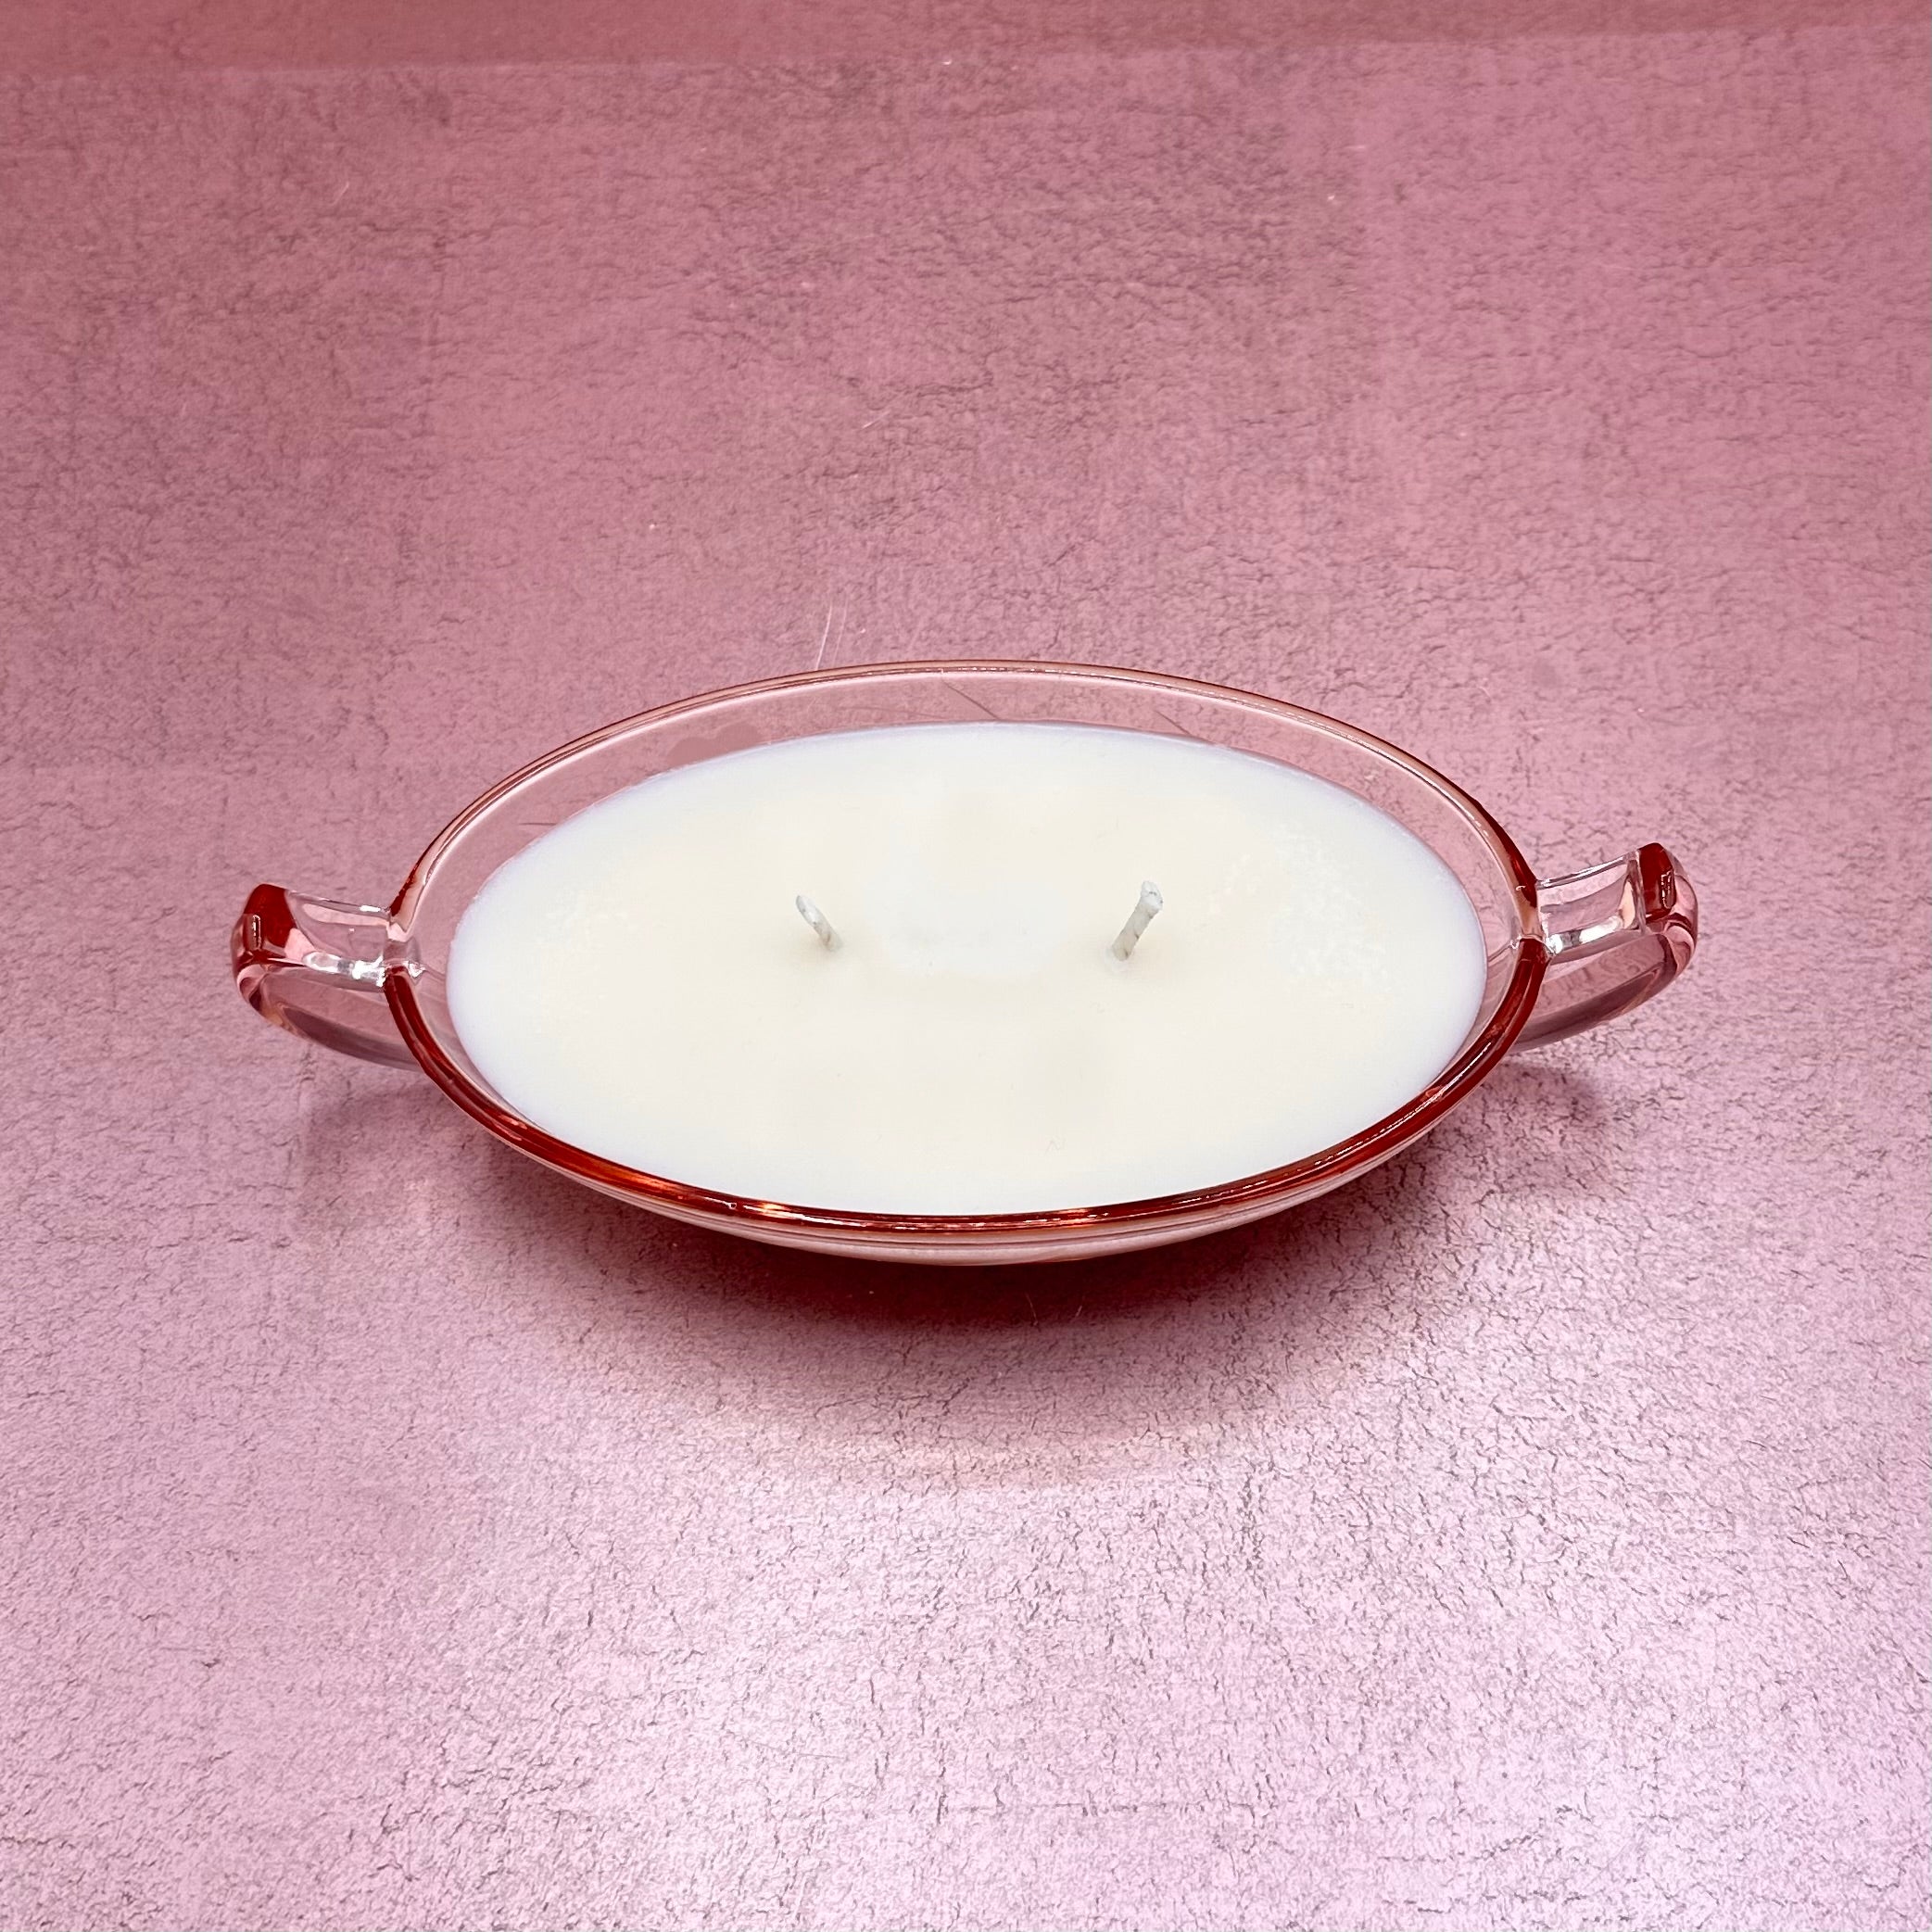 Pink Depression Glass Bowl w/ Handles Candle